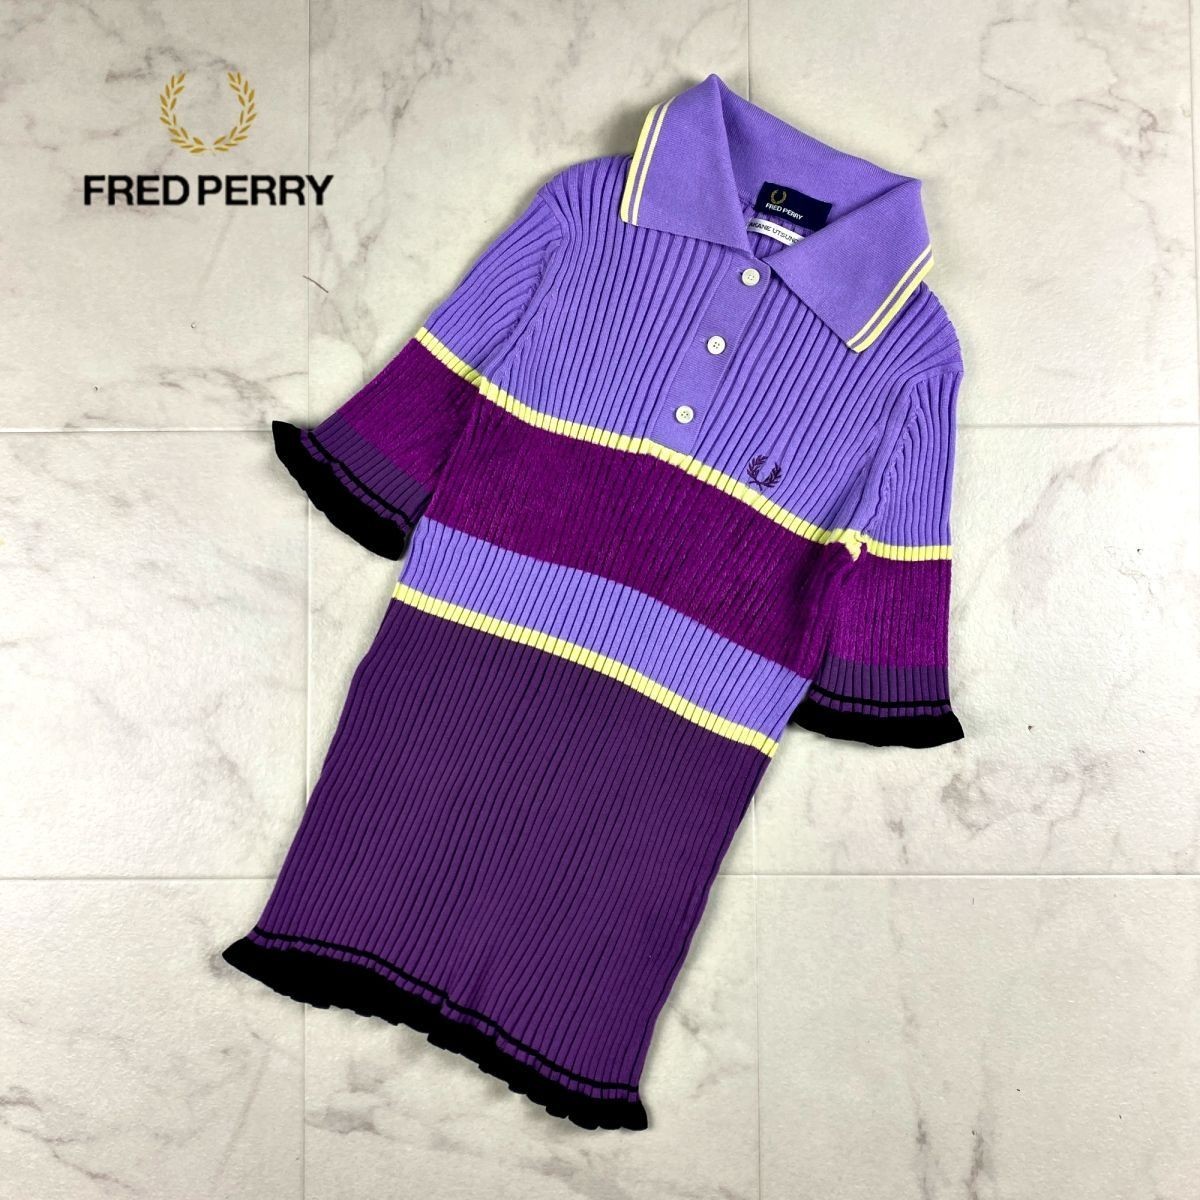 FRED PERRY ニットポロの値段と価格推移は？｜1件の売買データからFRED